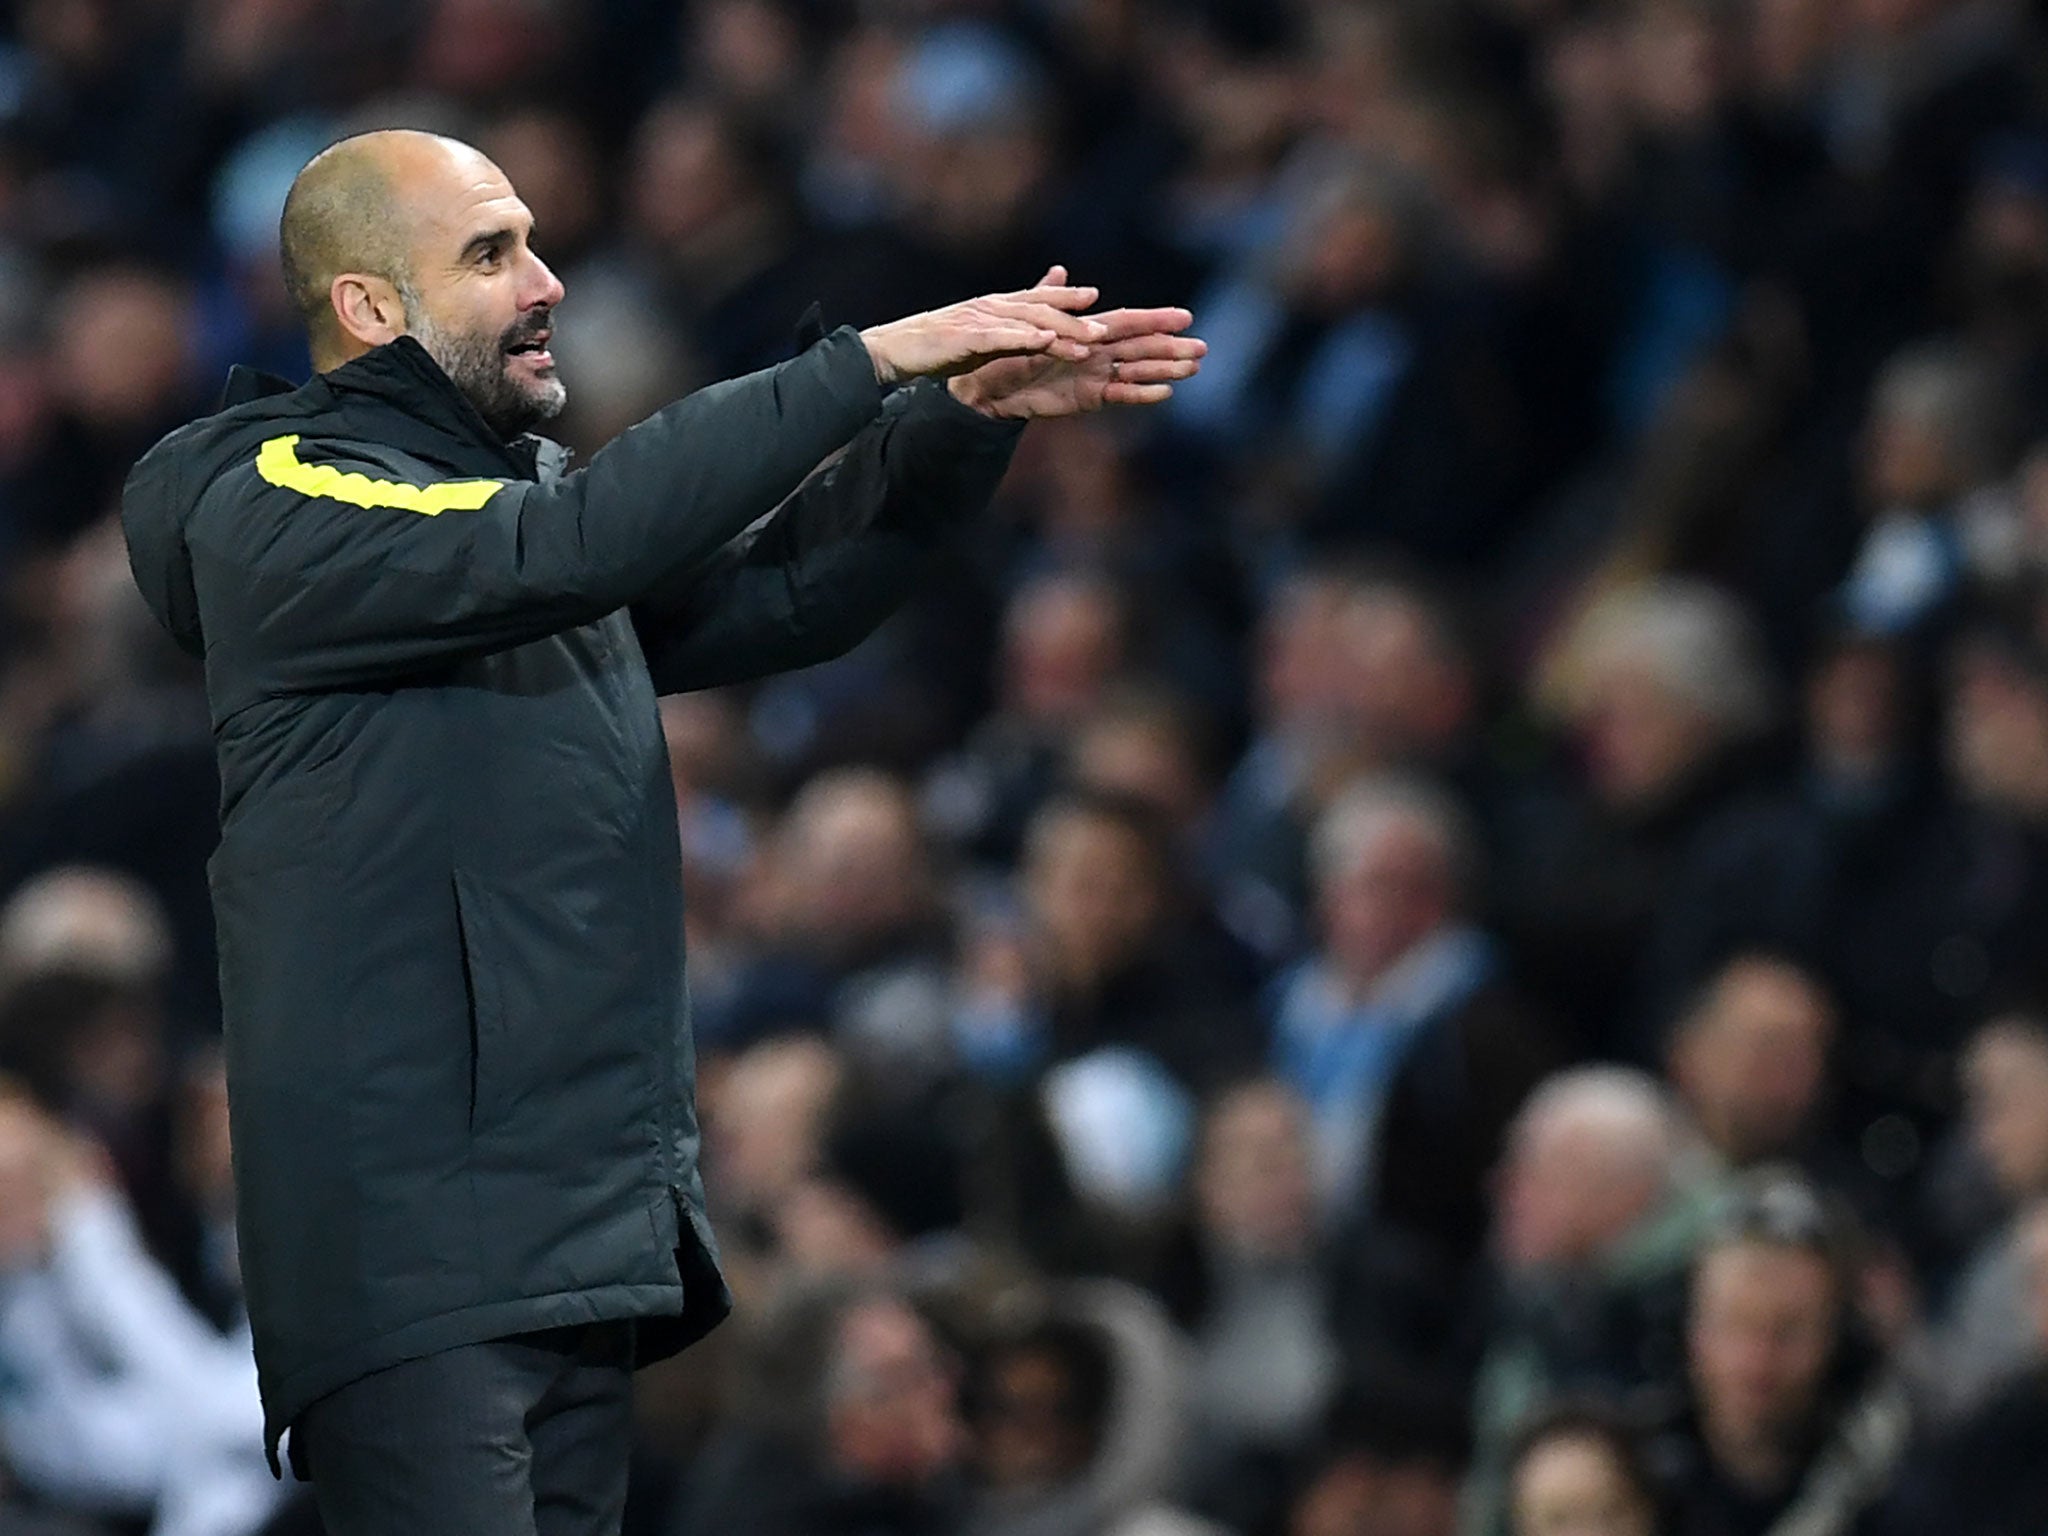 Pep Guardiola also acknowledged after the game that City's fight back was a significant moment for the team